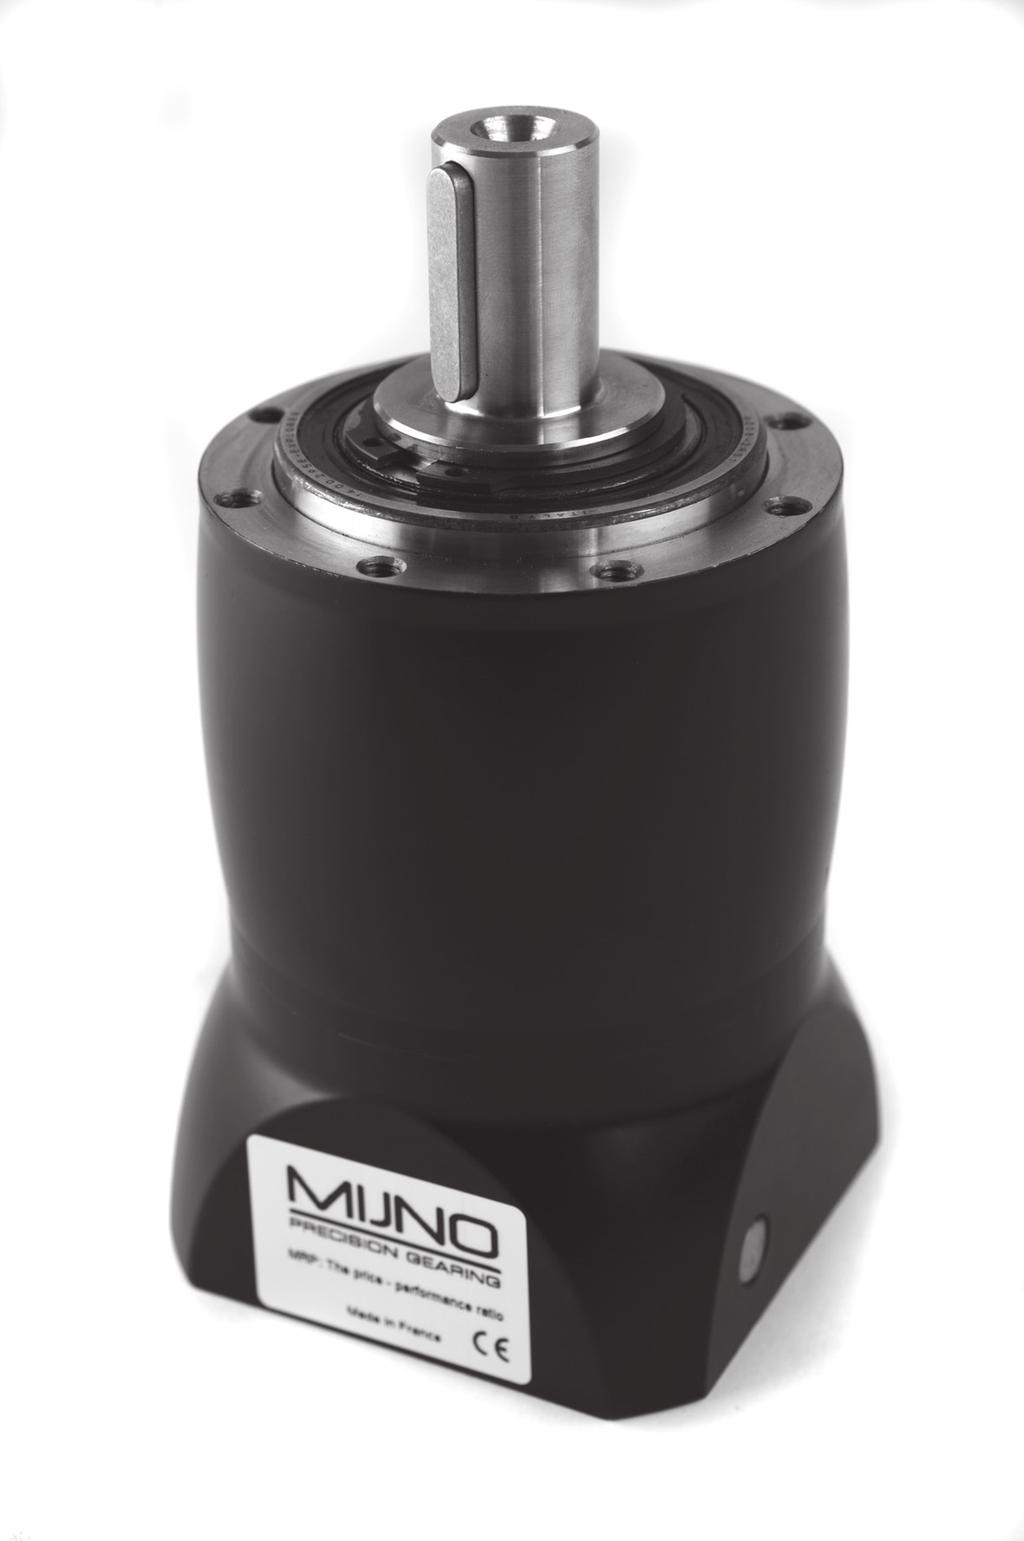 MRP line Standard range dedicated to servo-applications requiring precision, robustness and economy Up to 290 Nm rated Satellite gears are cantilever supported on hardened and ground shafts Output